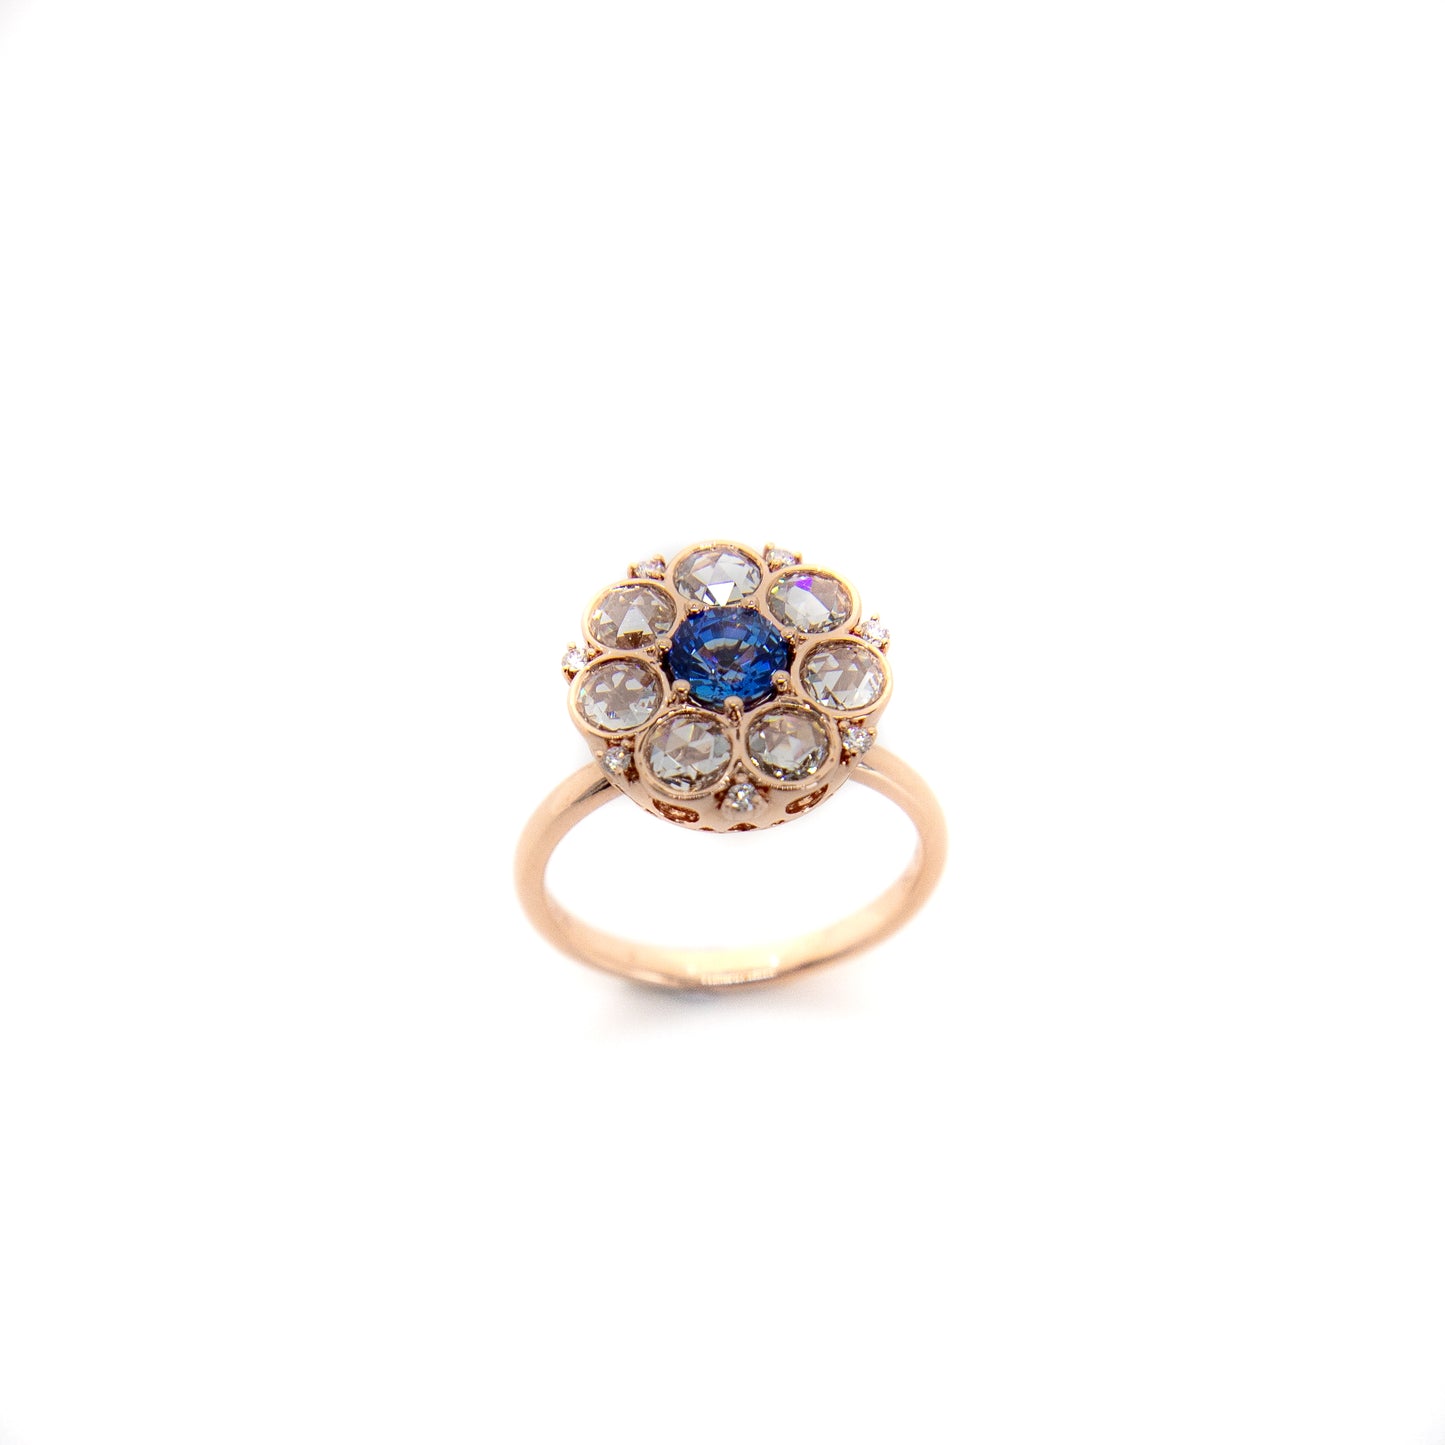 sapphire diamond cluster ring, rose cut diamonds, rose cut diamond ring, light blue sapphire ring, sapphire cluster ring, antique ring, rose cut, hong kong jewellery, ornate jewellery, cocktail ring, 